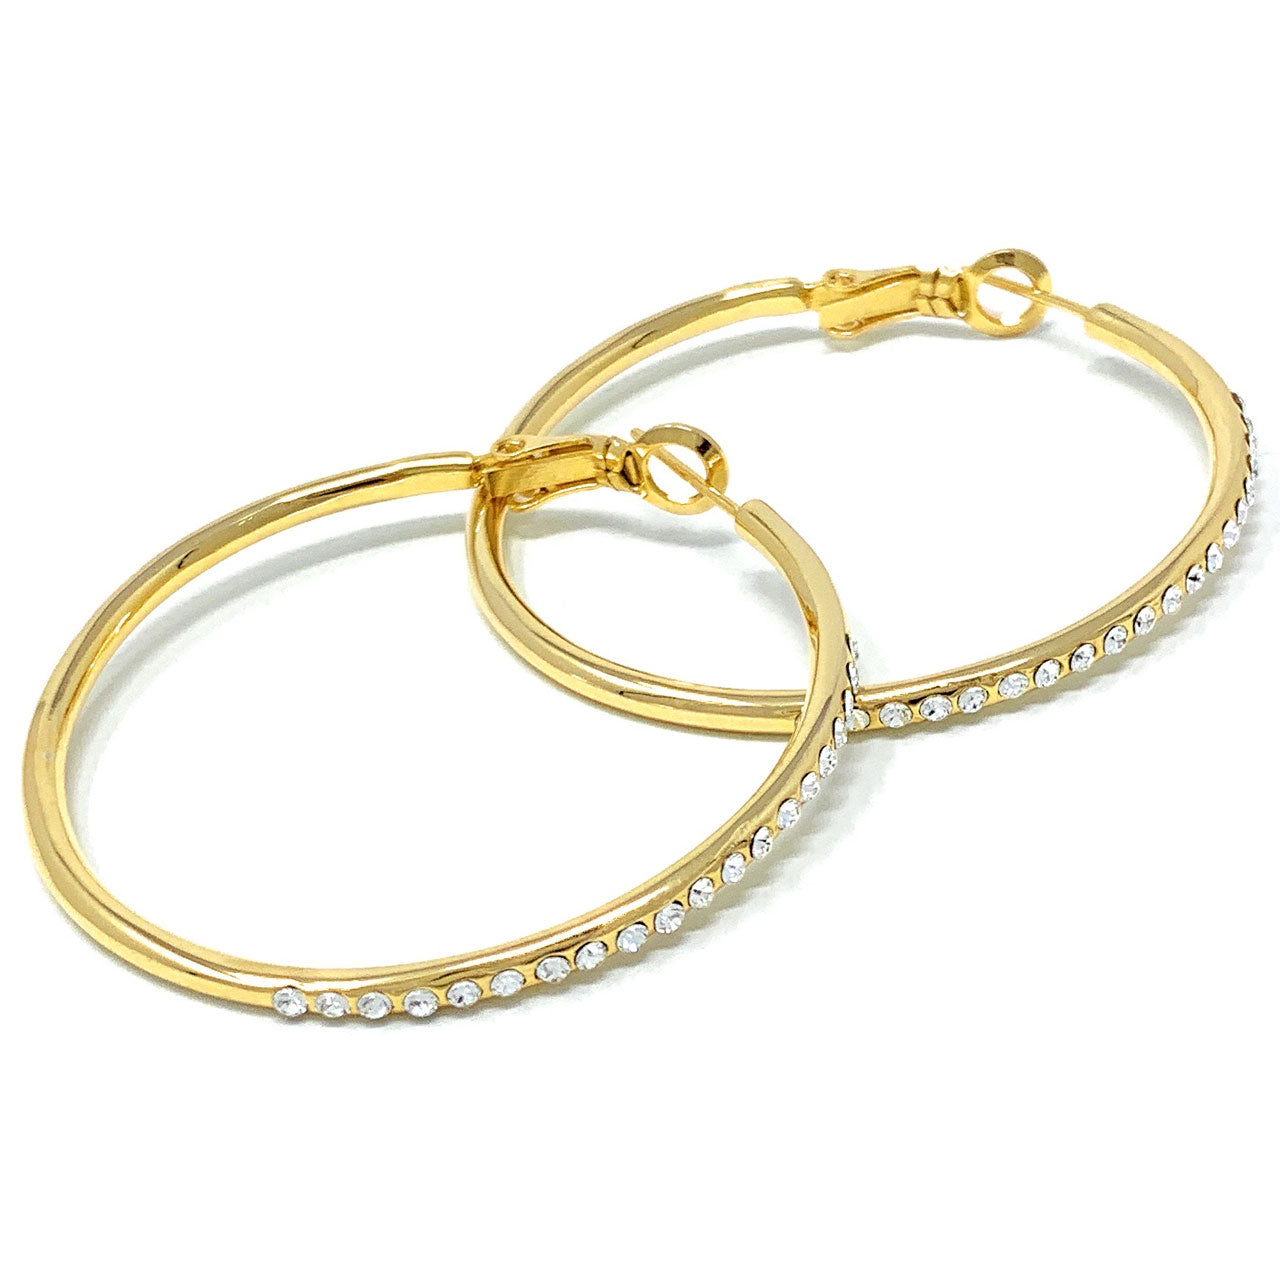 Amelia Large Pave Hoop Earrings with White Clear Round Crystals from Swarovski Gold Plated - Ed Heart